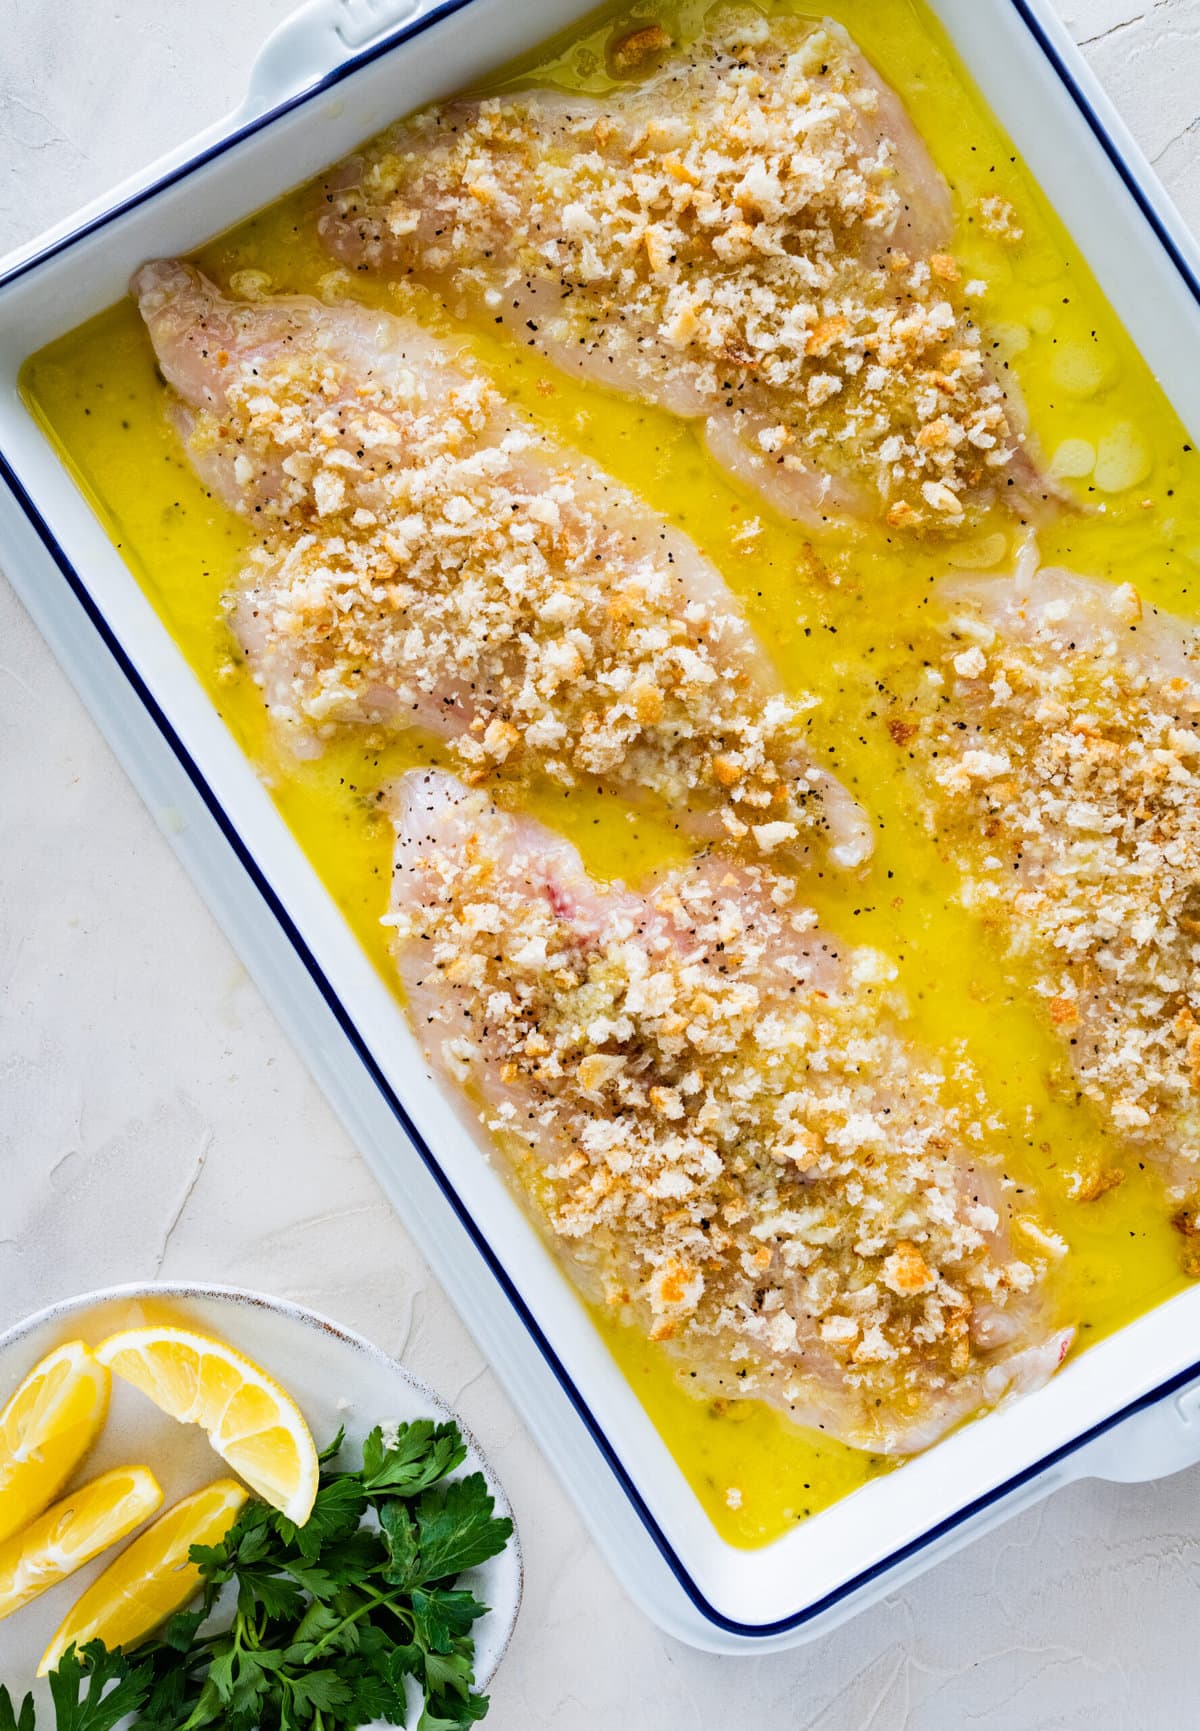 Baked Flounder Recipe with Lemon Butter Garlic Sauce- fish with sauce before baking in the oven. Adding homemade breadcrumbs on top.